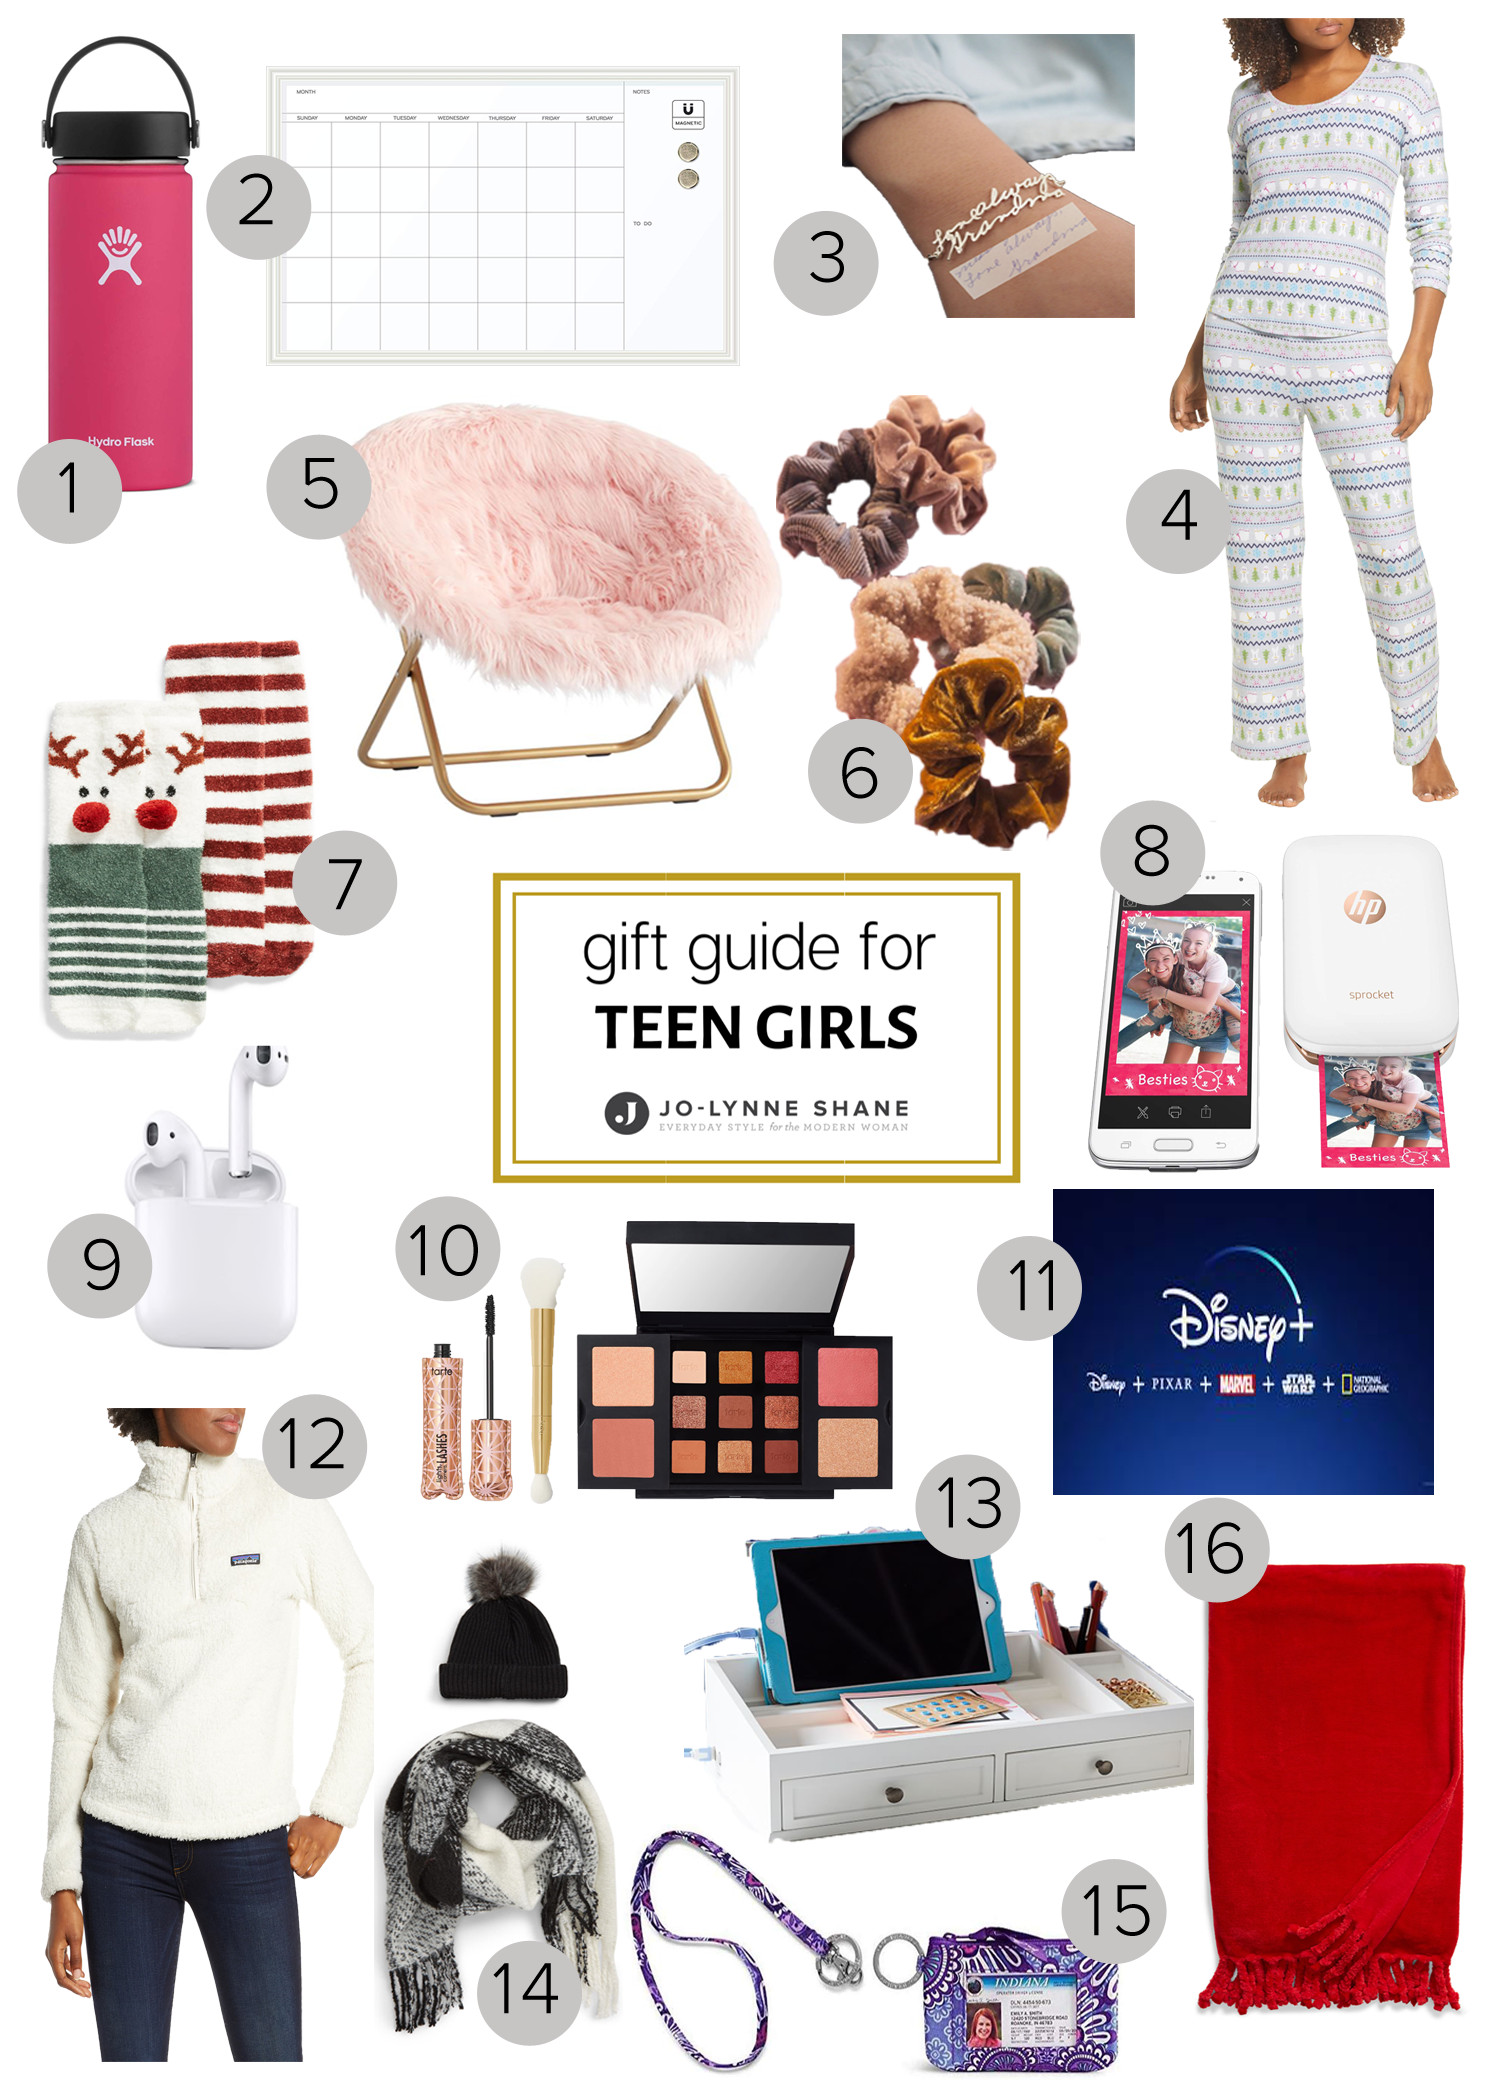 Xmas Gift Ideas For Girlfriend
 Holiday Gift Ideas for Teen Girls